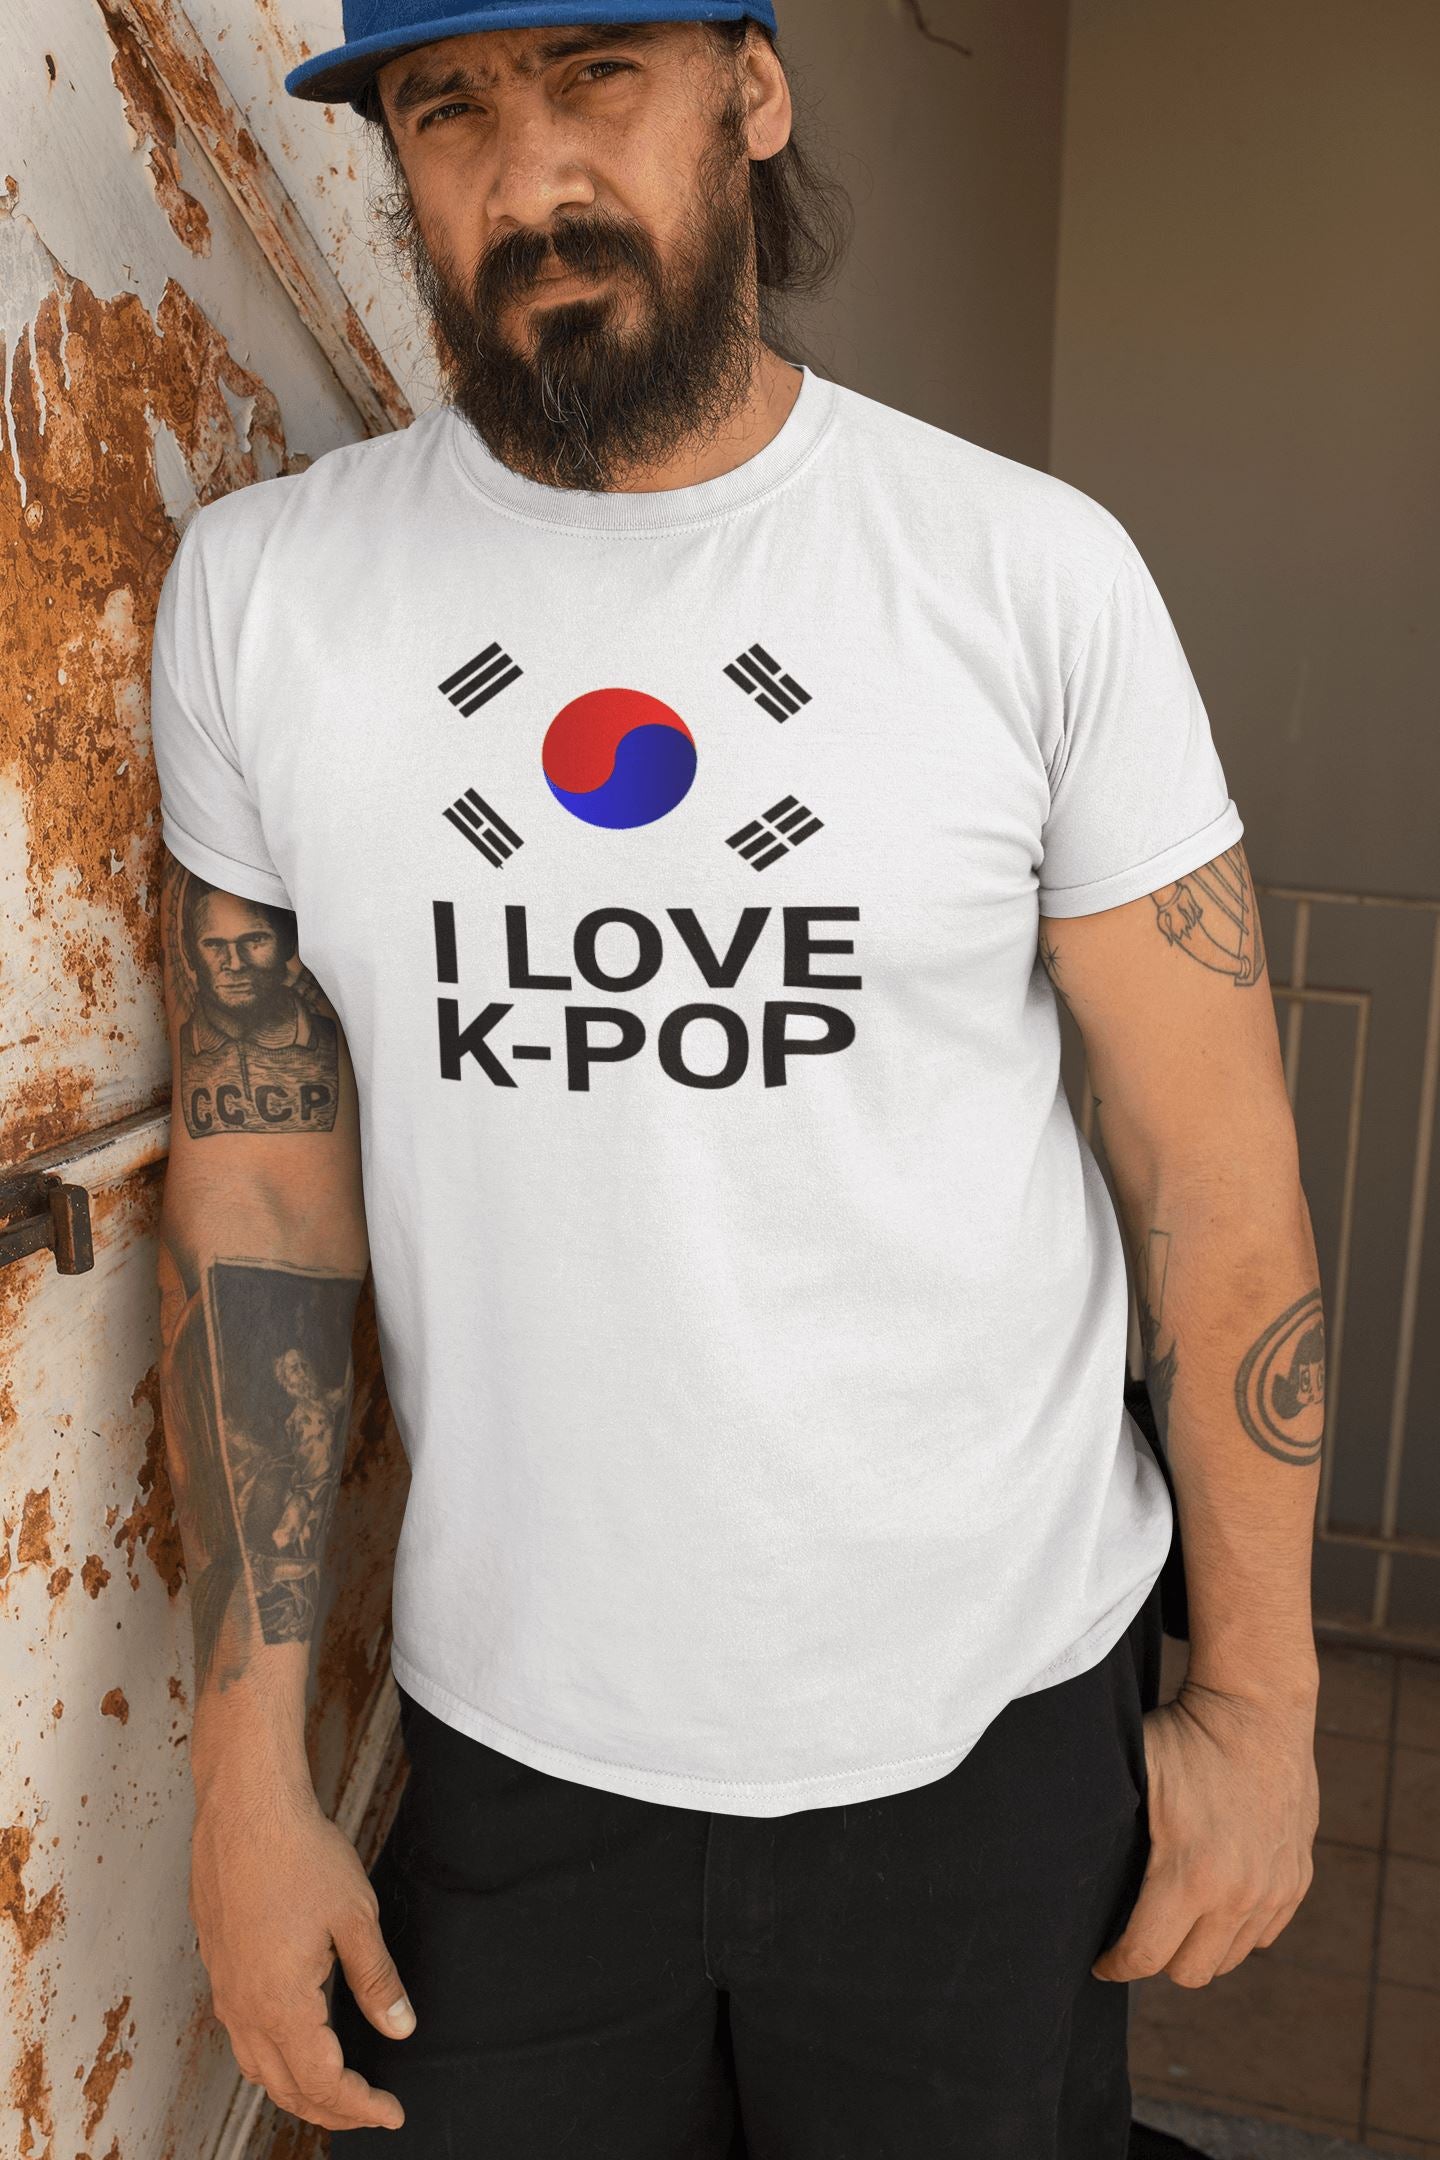 I Love K-Pop Official White T Shirt for Men and Women - Catch My Drift India  clothing, female, KPOP, made in india, MOVIES, MUSIC, pop, shirt, t shirt, trending, tshirt, white